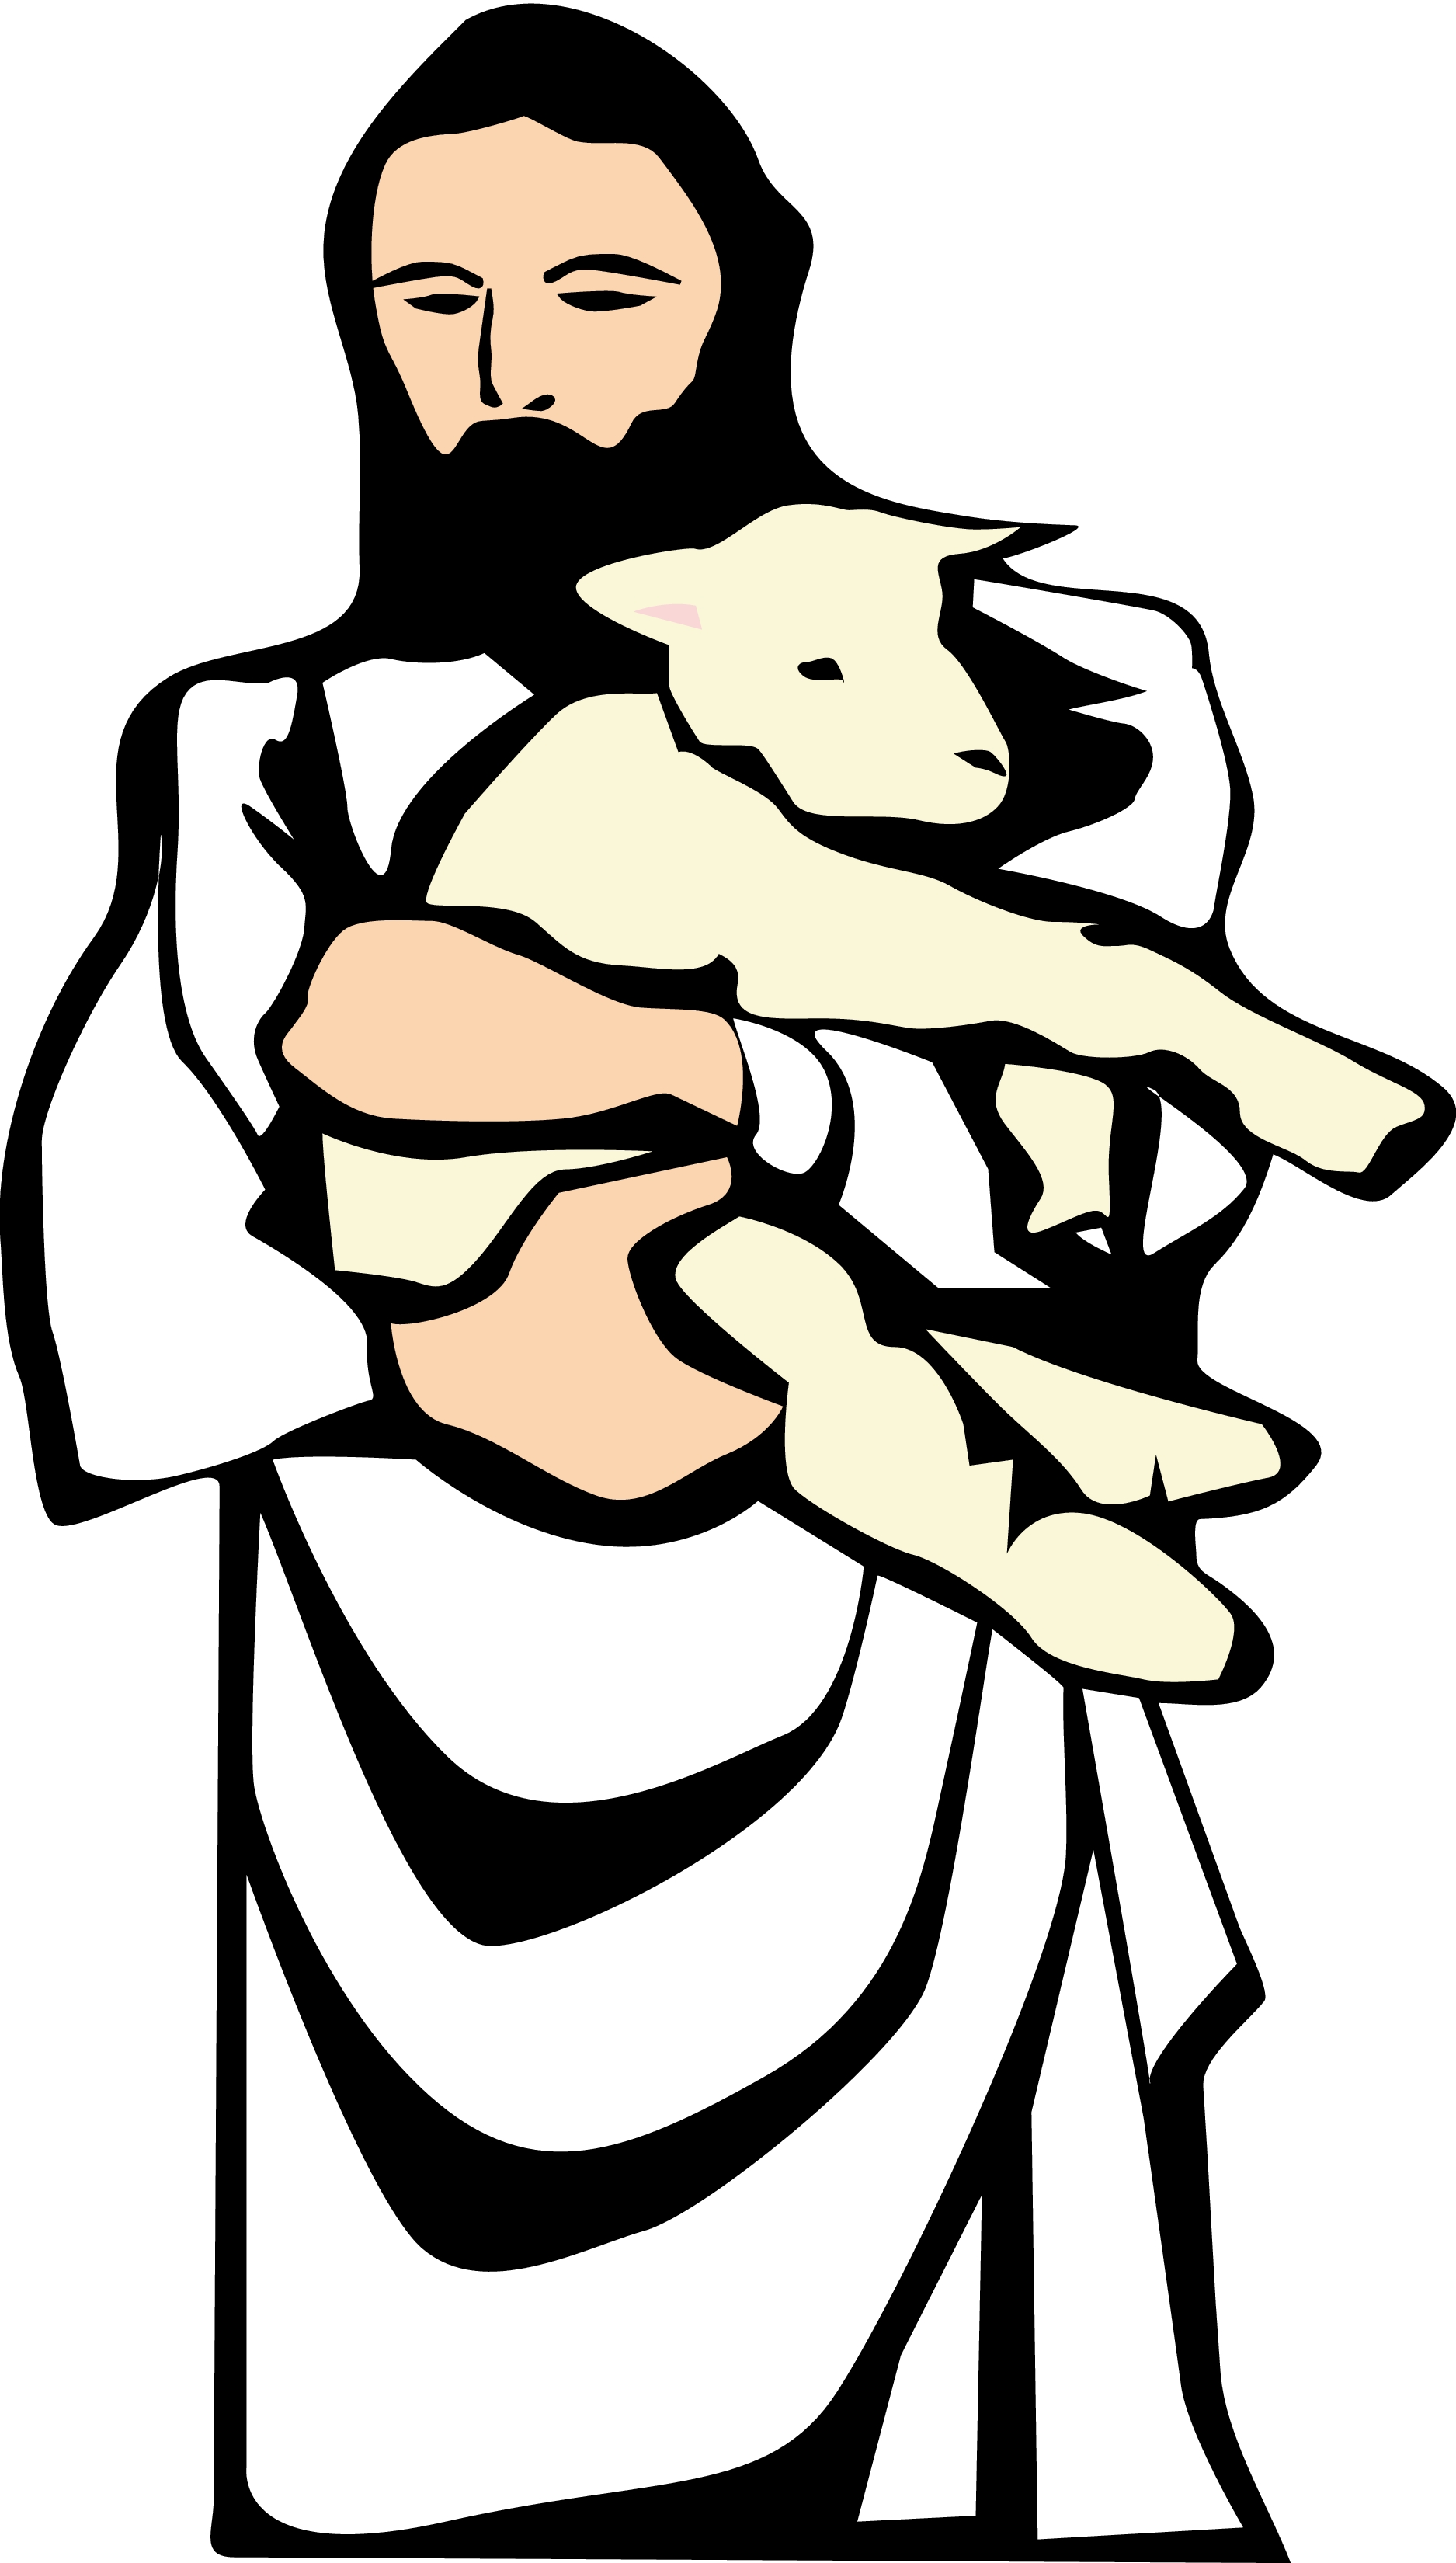 clipart of jesus and lamb - photo #9